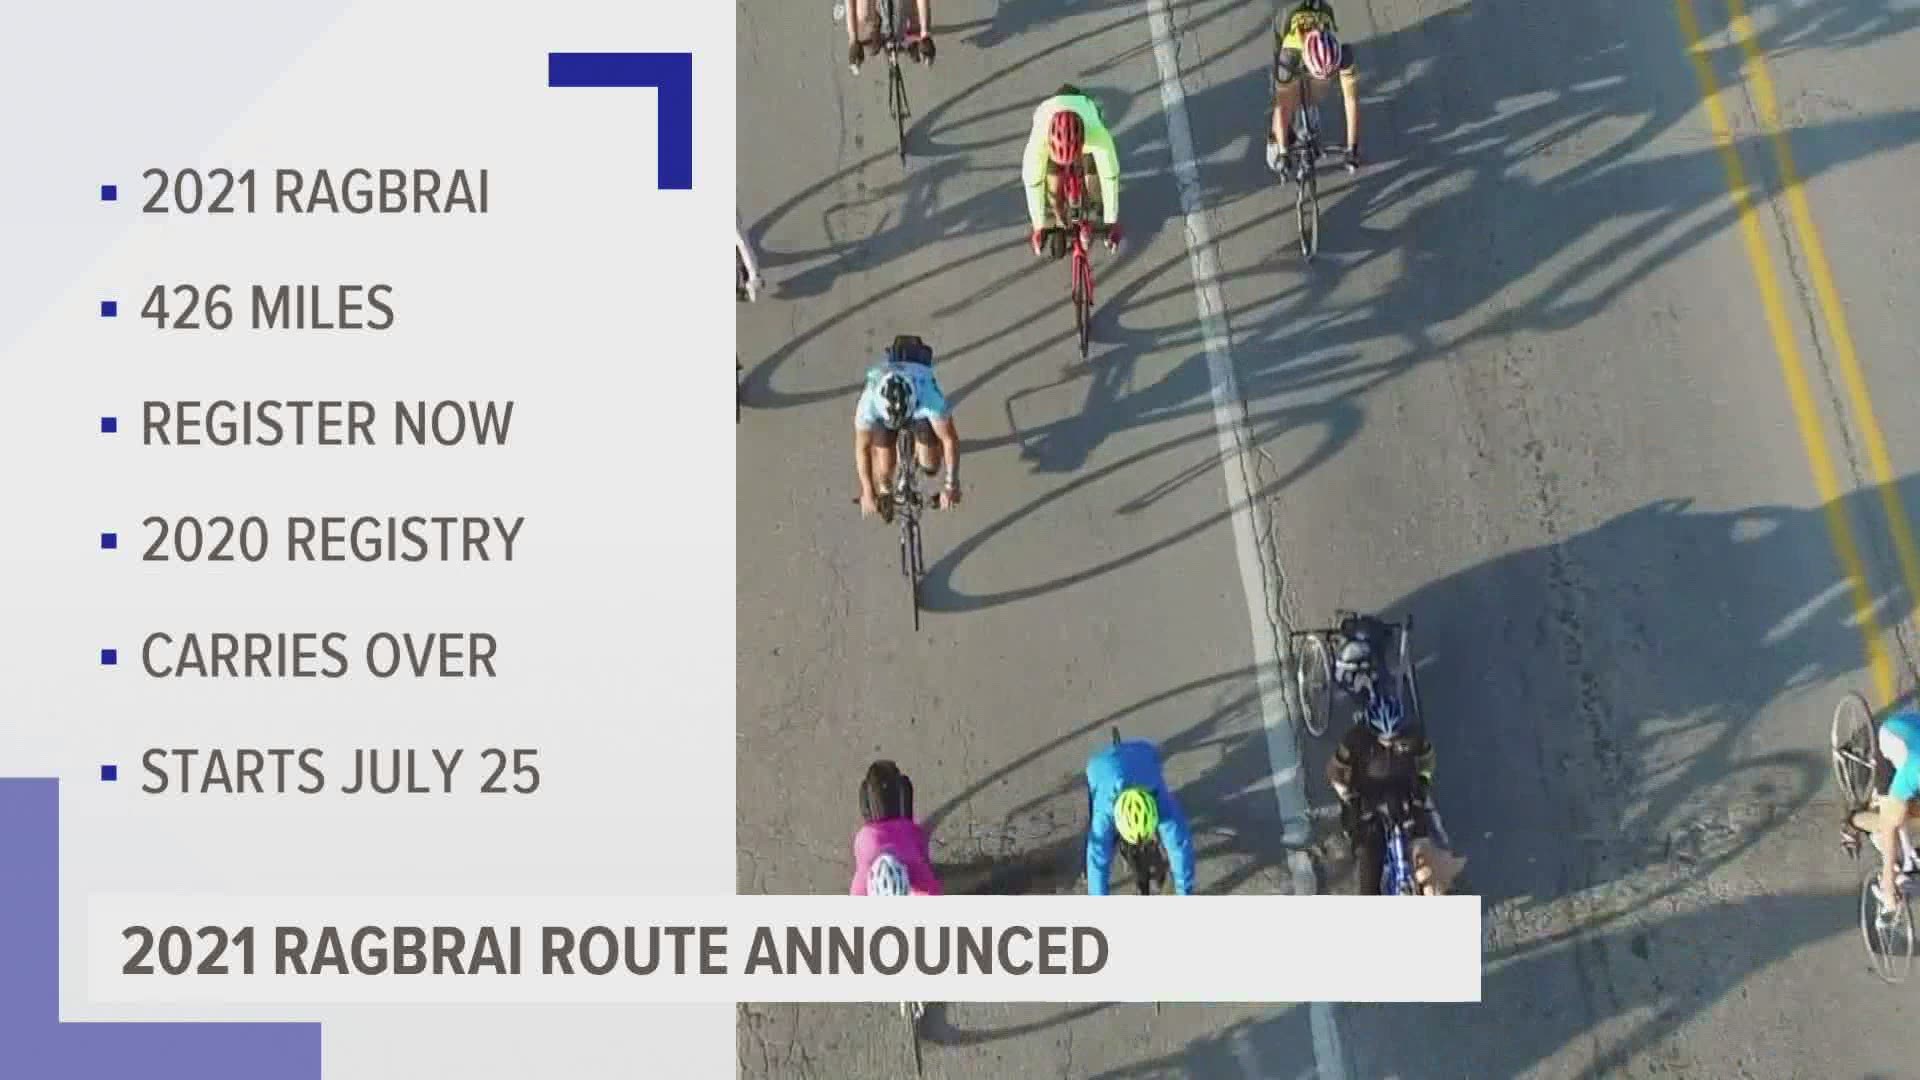 The eight overnight towns for RAGBRAI 2021 are Le Mars, Sac City, Fort Dodge, Iowa Falls, Waterloo, Anamosa, DeWitt and Clinton.